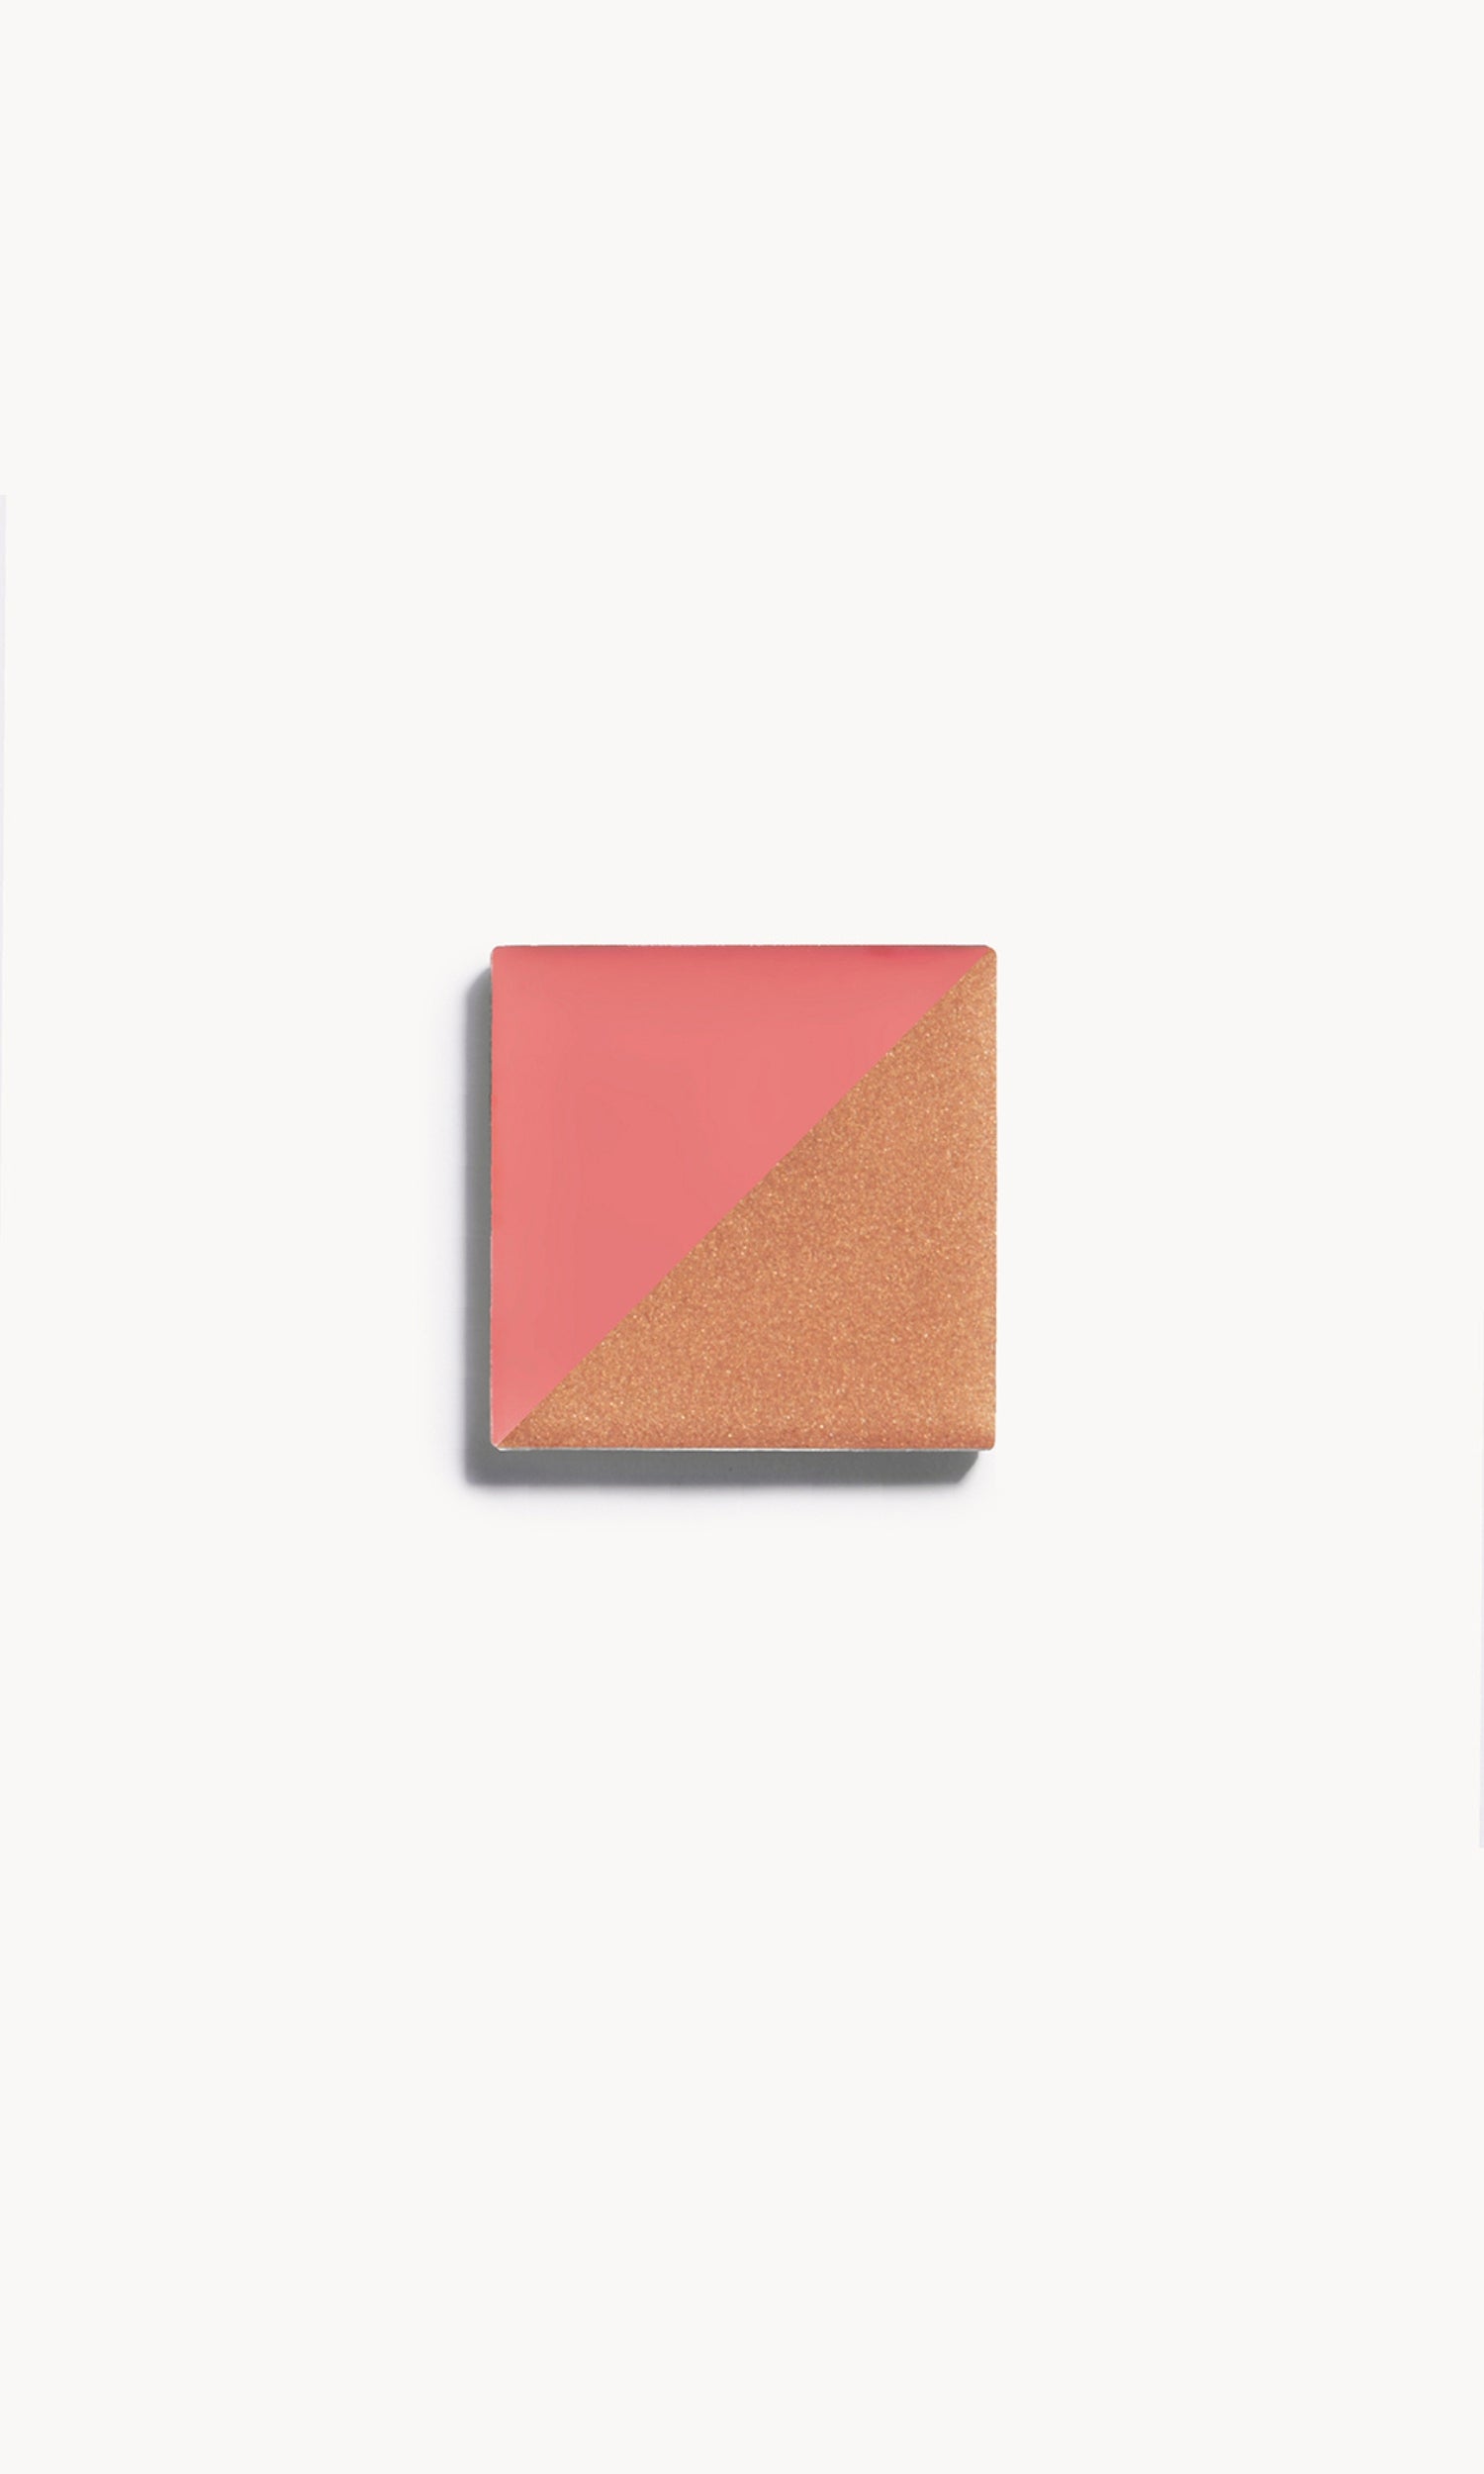 A square of pink cream blush and cream bronzer, split diagonally with a shade on each side